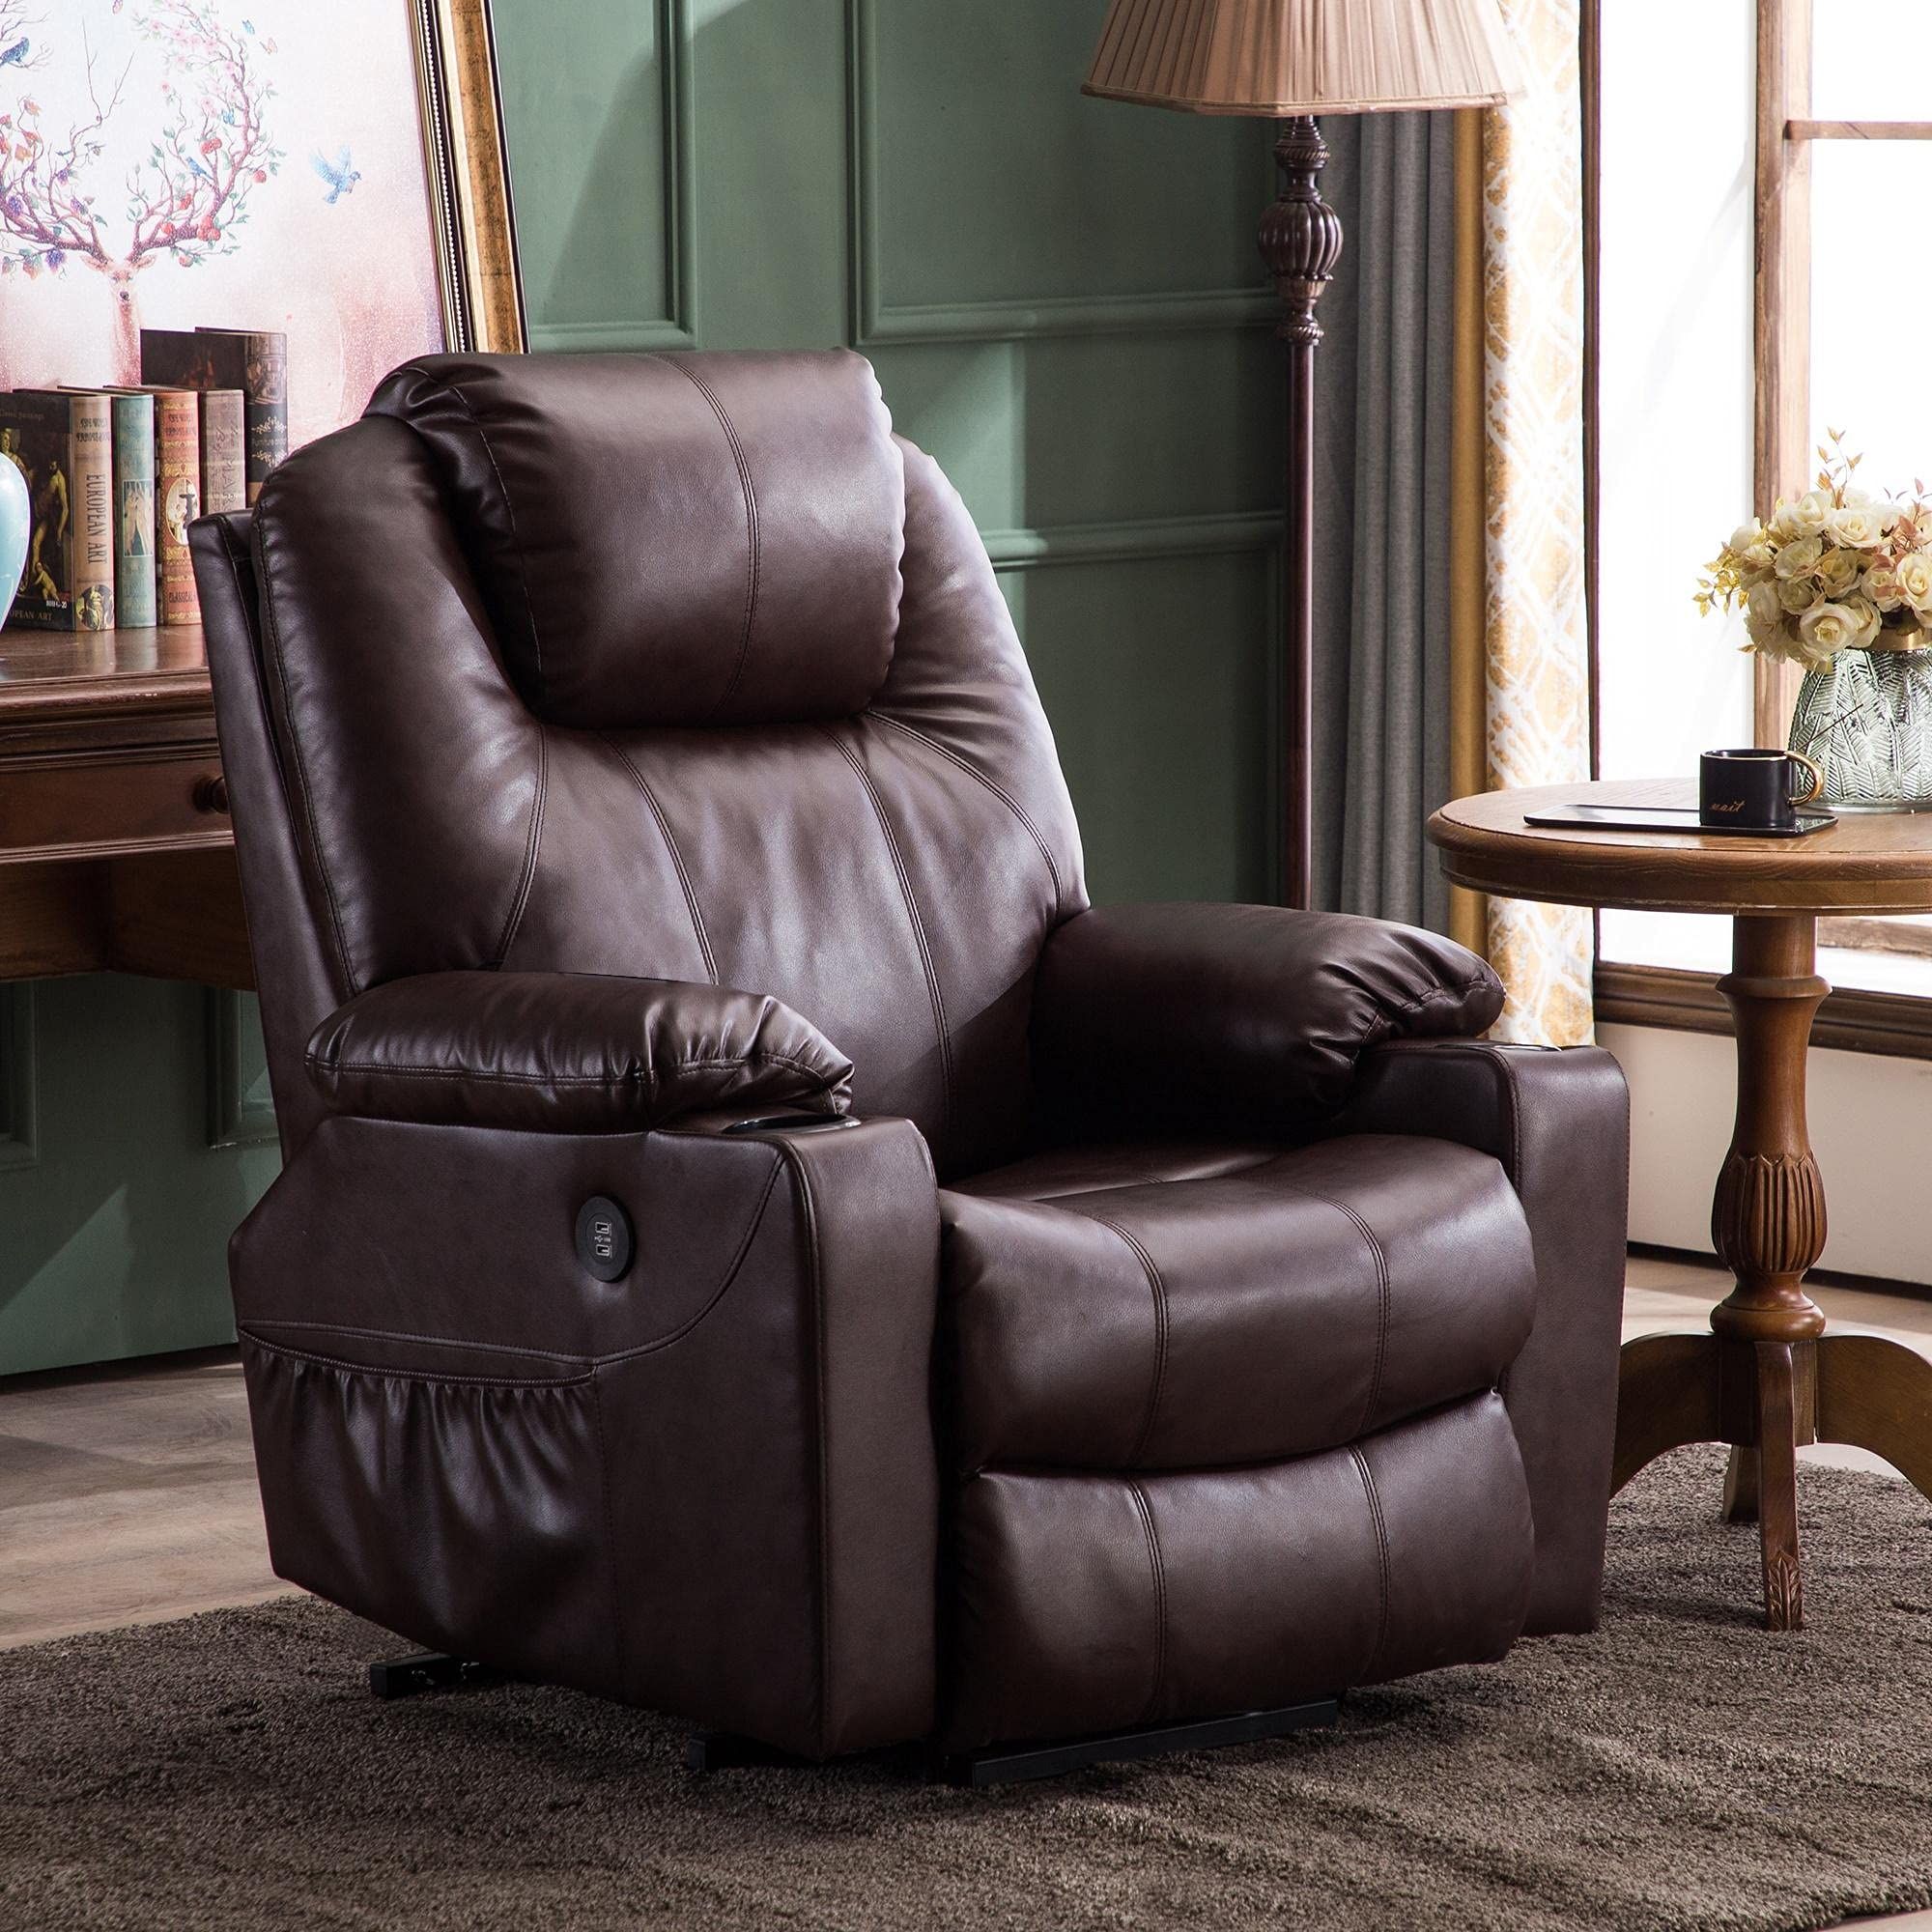 The Ultimate Recliner: Choosing the Best for Relaxation插图4